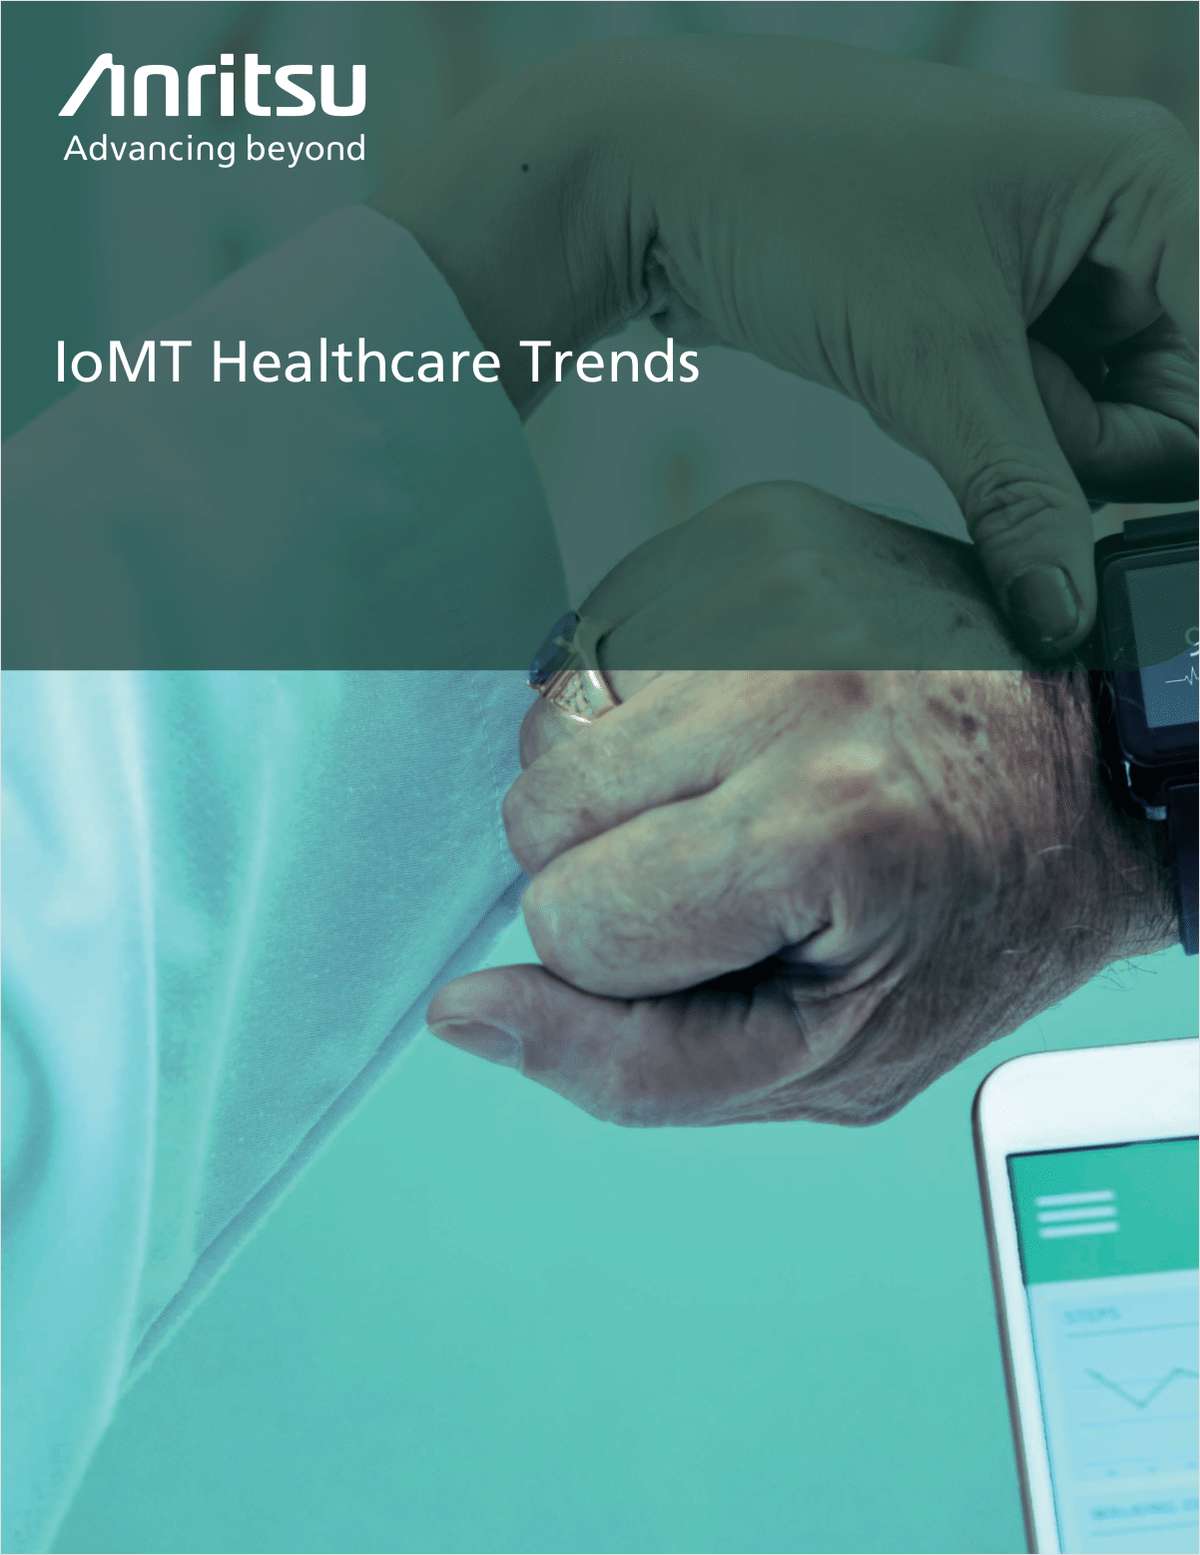 Internet of Medical Things (IoMT) Healthcare Trends